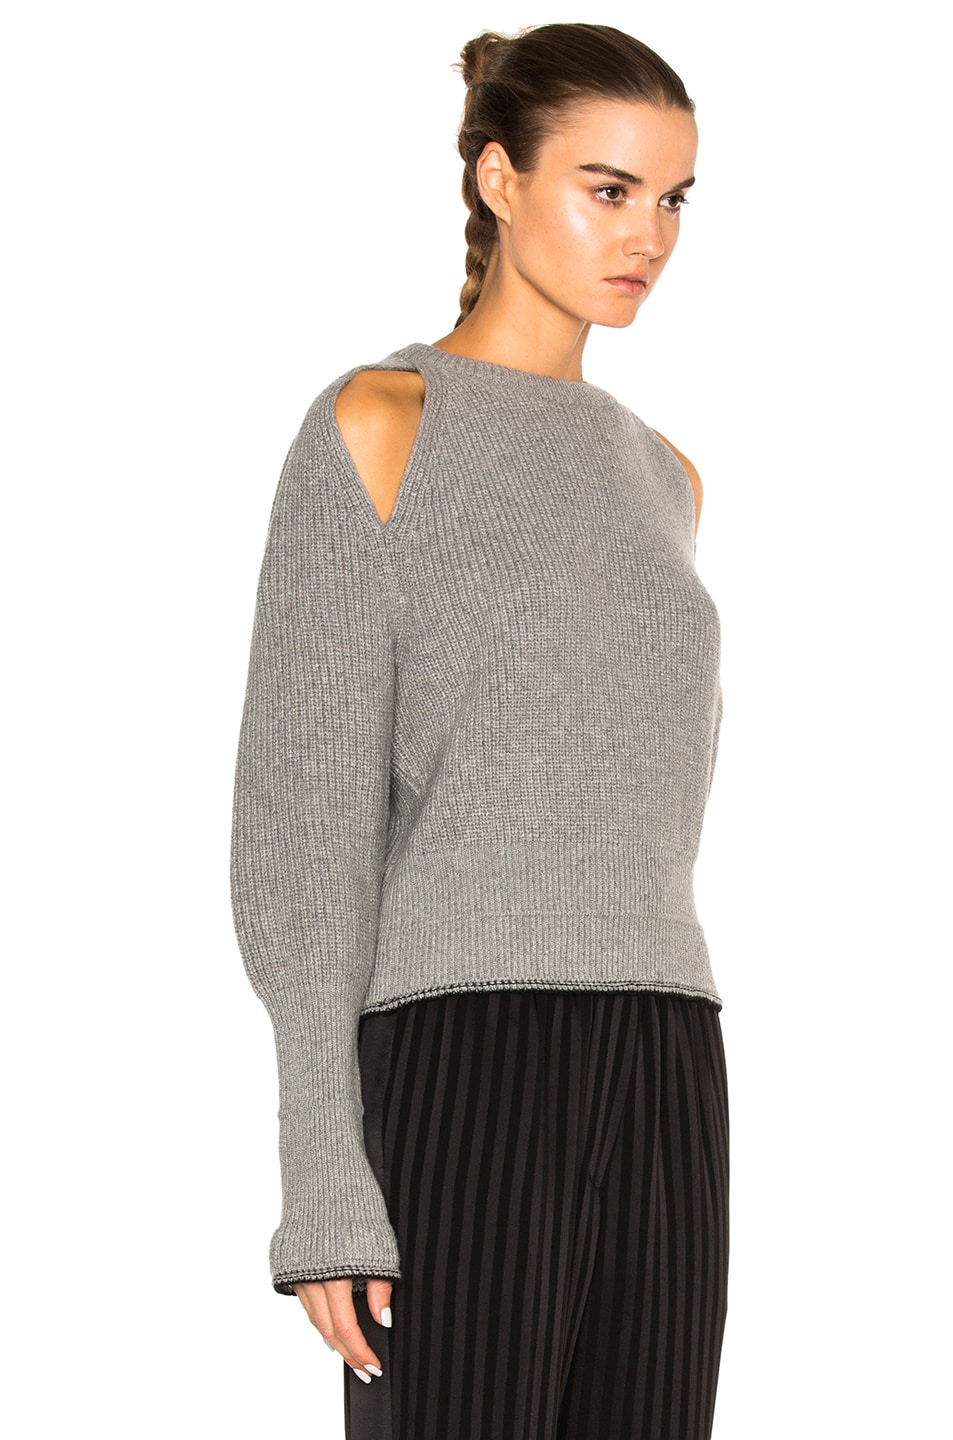 GIVENCHY Cropped Shoulder Cut Out Sweater, Grey | ModeSens